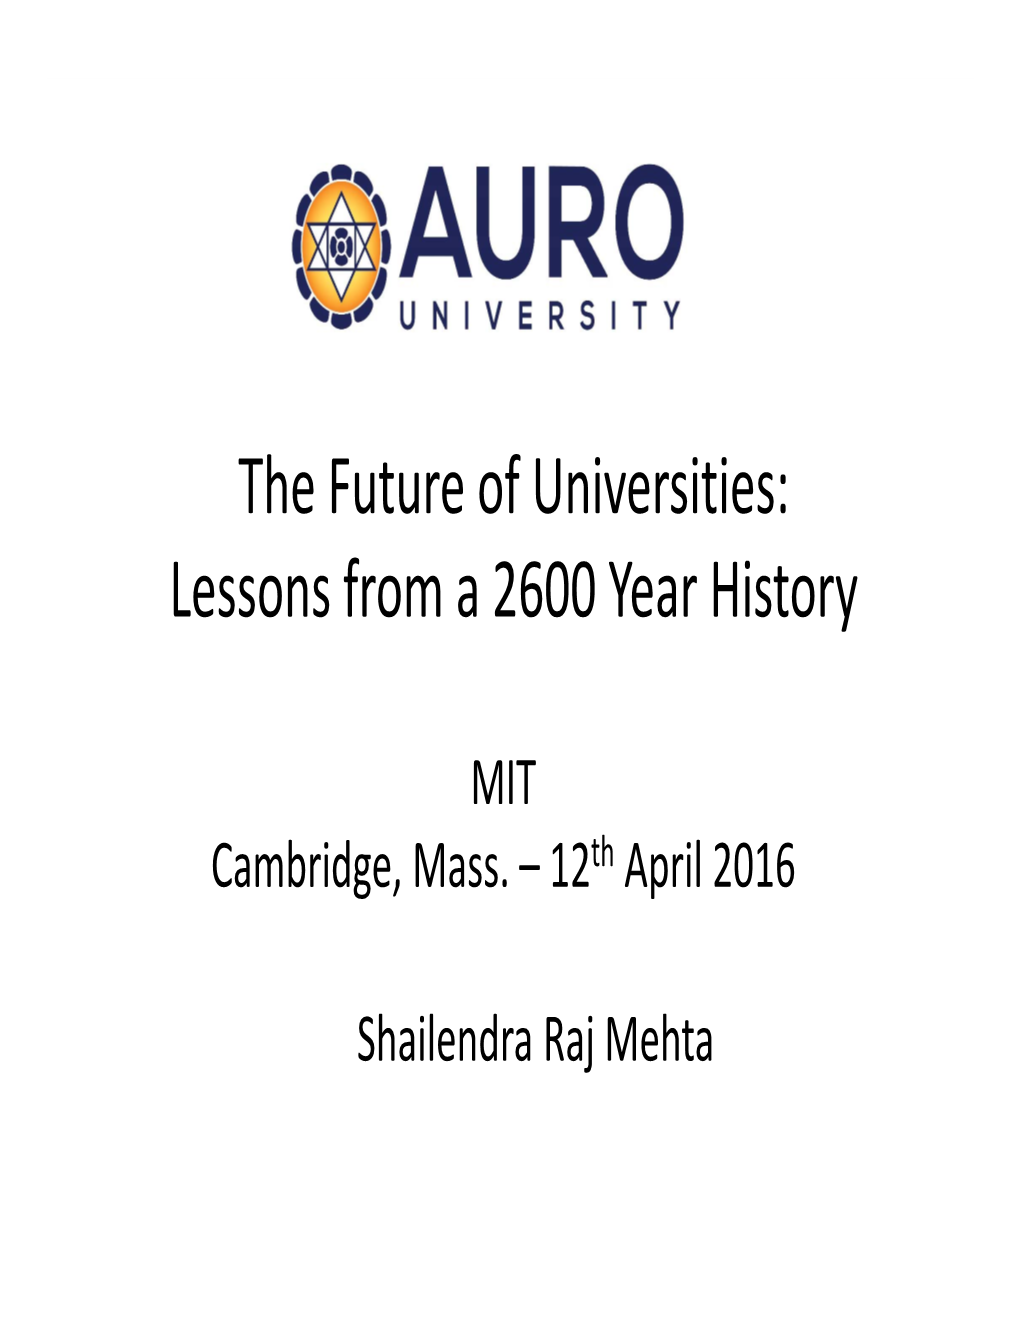 The Future of Universities: Lessons from a 2600 Year History